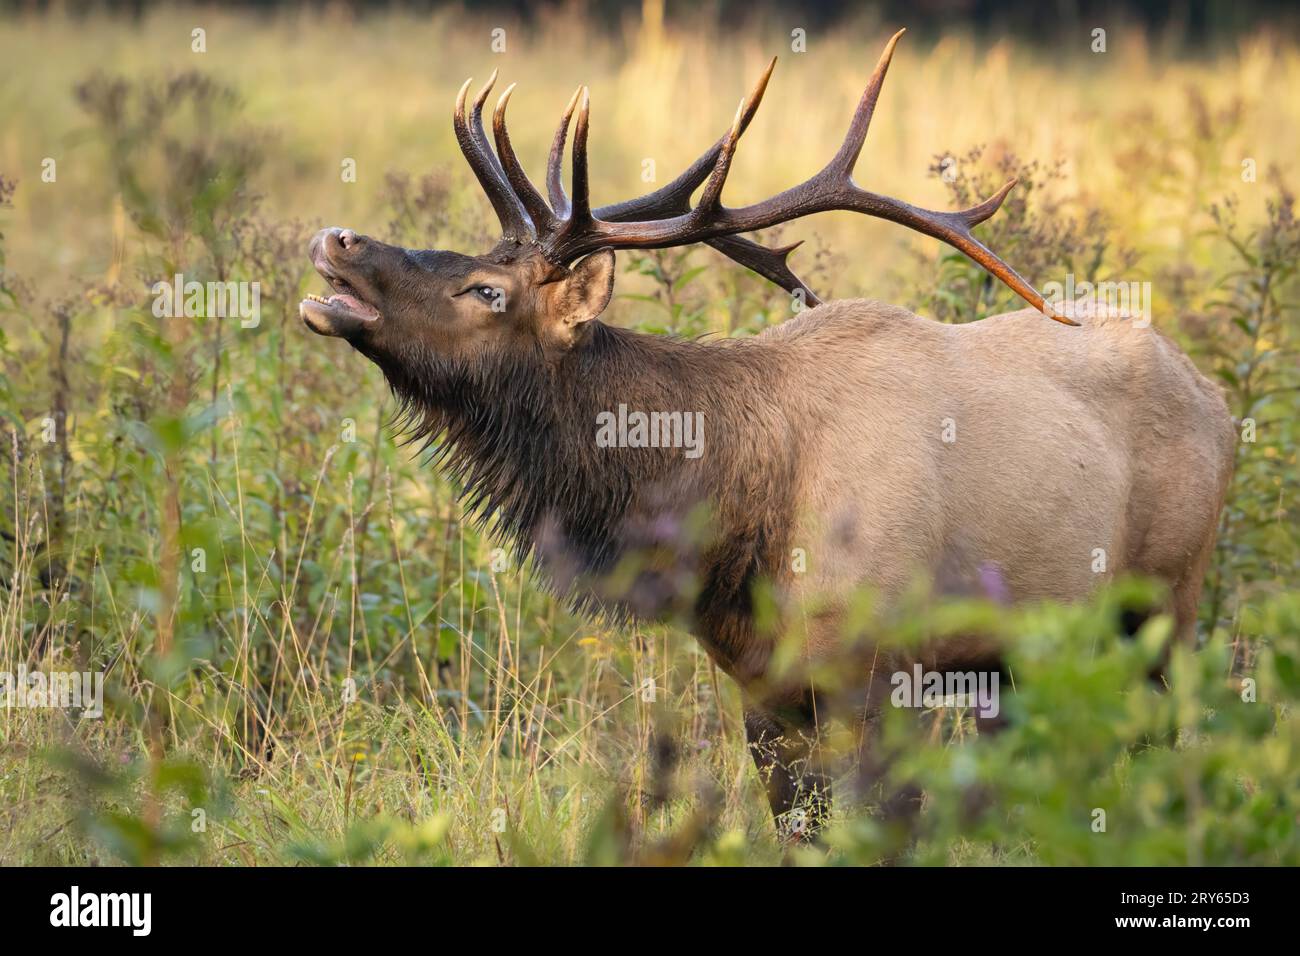 A Bull Elk Bugling into the Distance Stock Photo